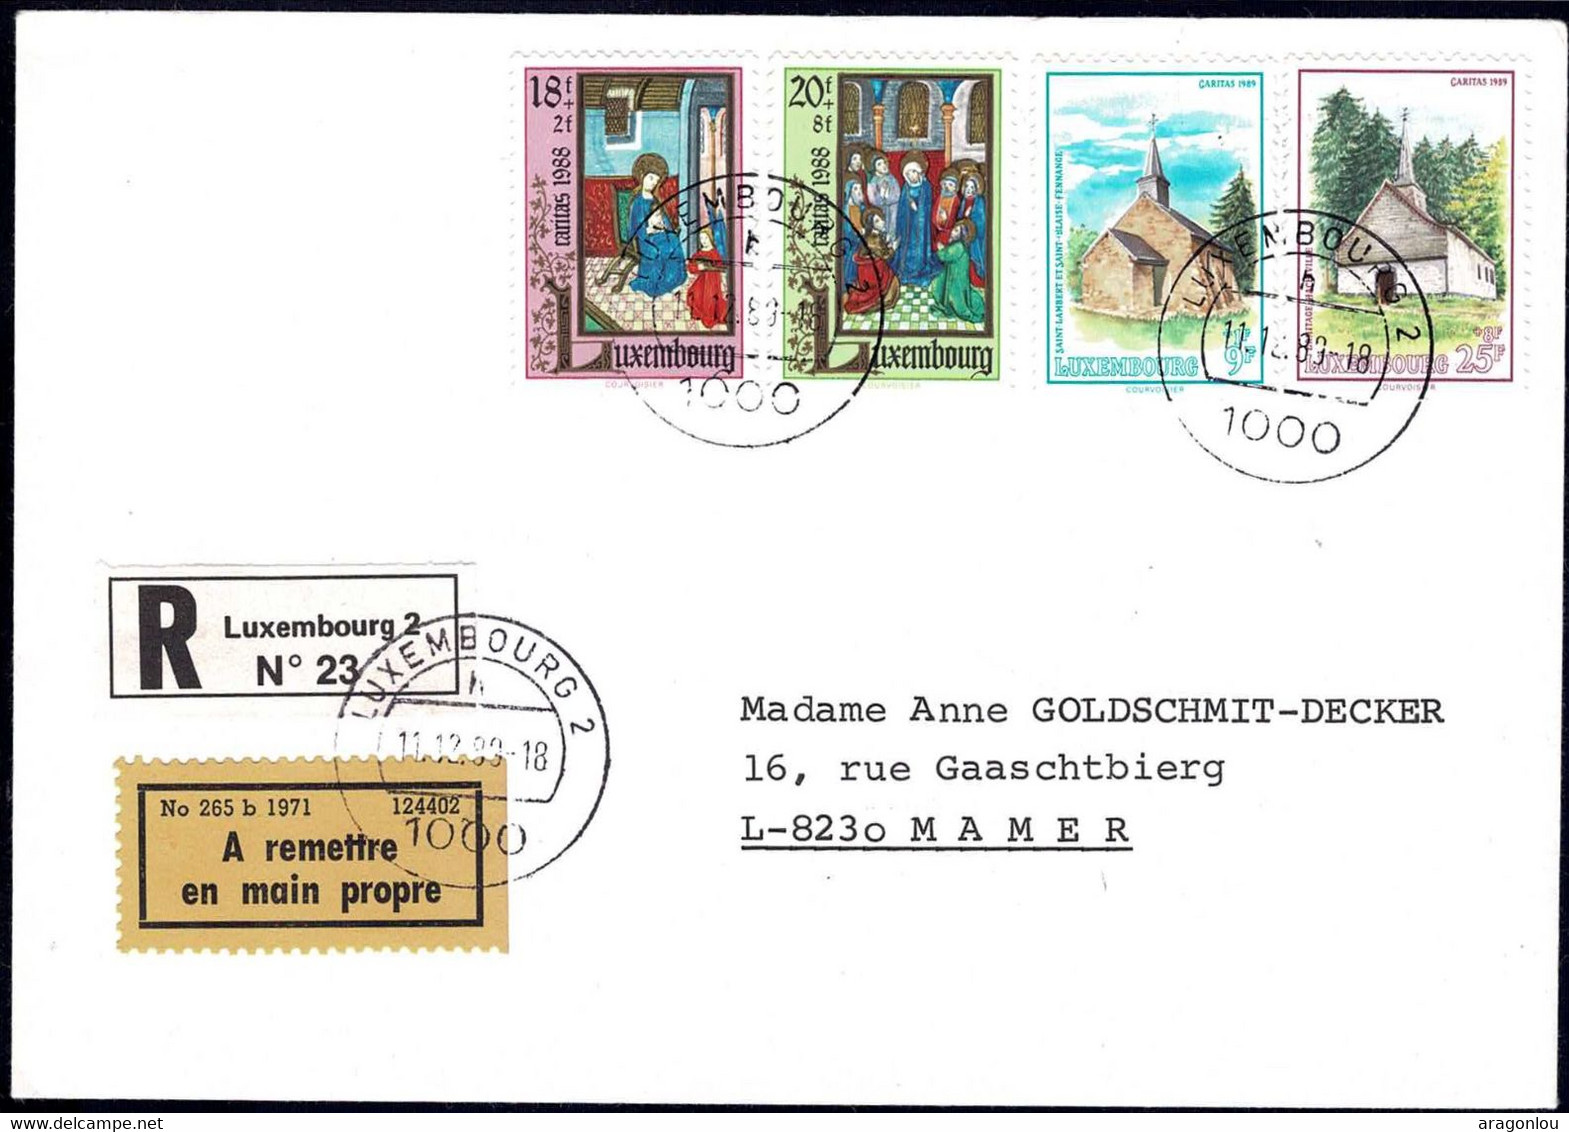 Luxembourg, Luxemburg 1983 Lettre Recommandé Exprès Caritas, Luxembourg-Mamer - Covers & Documents